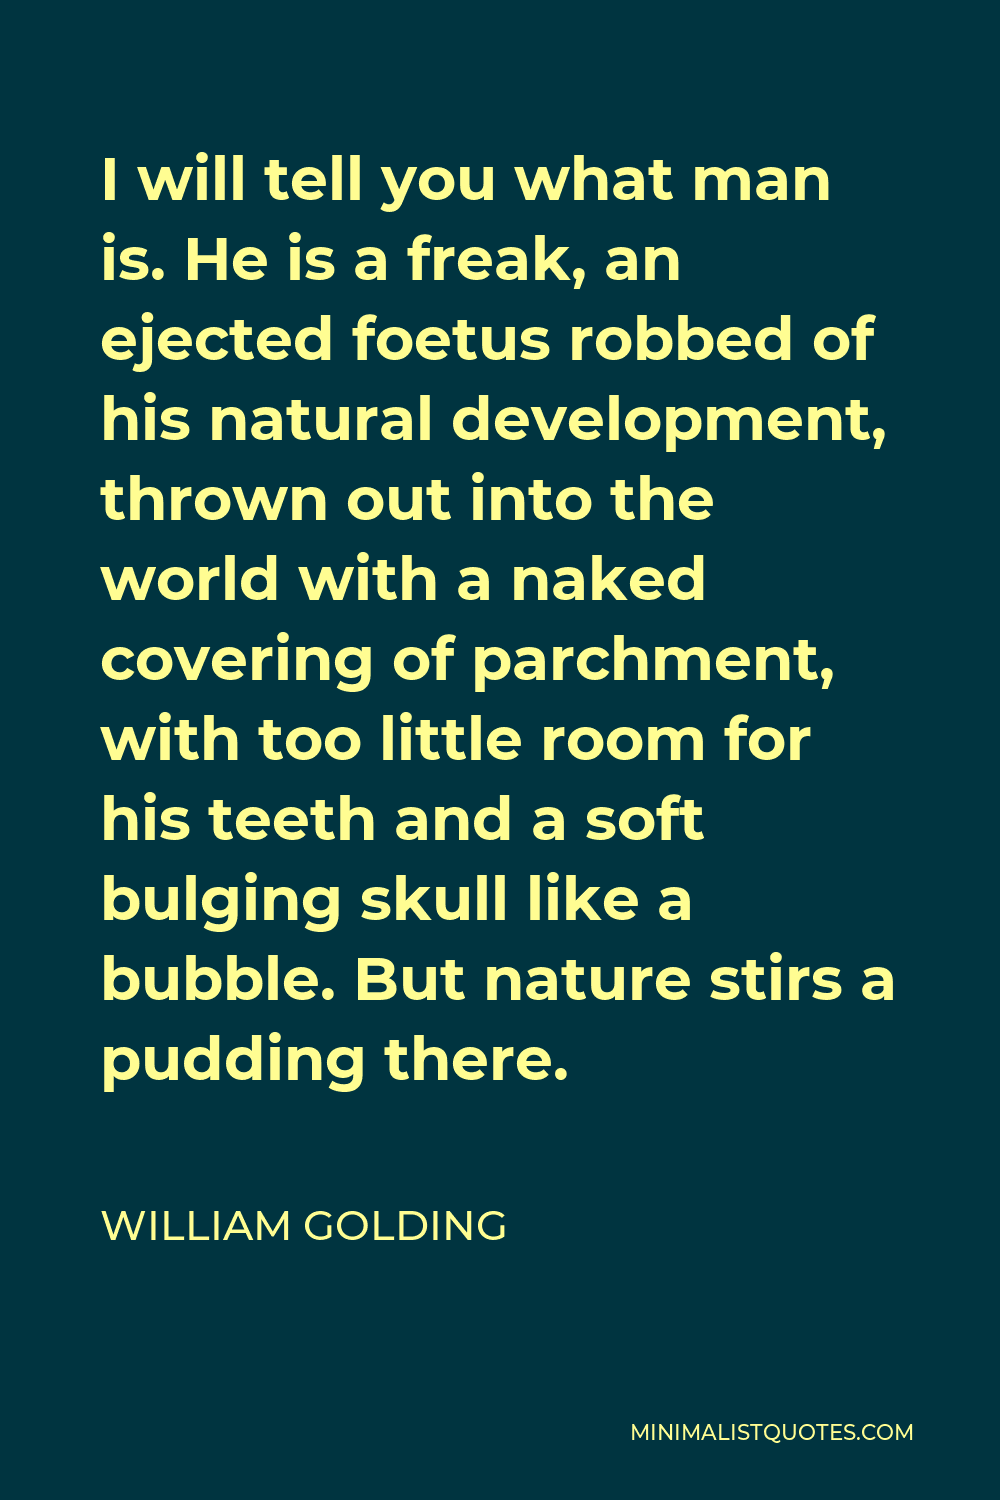 William Golding Quote - I will tell you what man is. He is a freak, an ejected foetus robbed of his natural development, thrown out into the world with a naked covering of parchment, with too little room for his teeth and a soft bulging skull like a bubble. But nature stirs a pudding there.